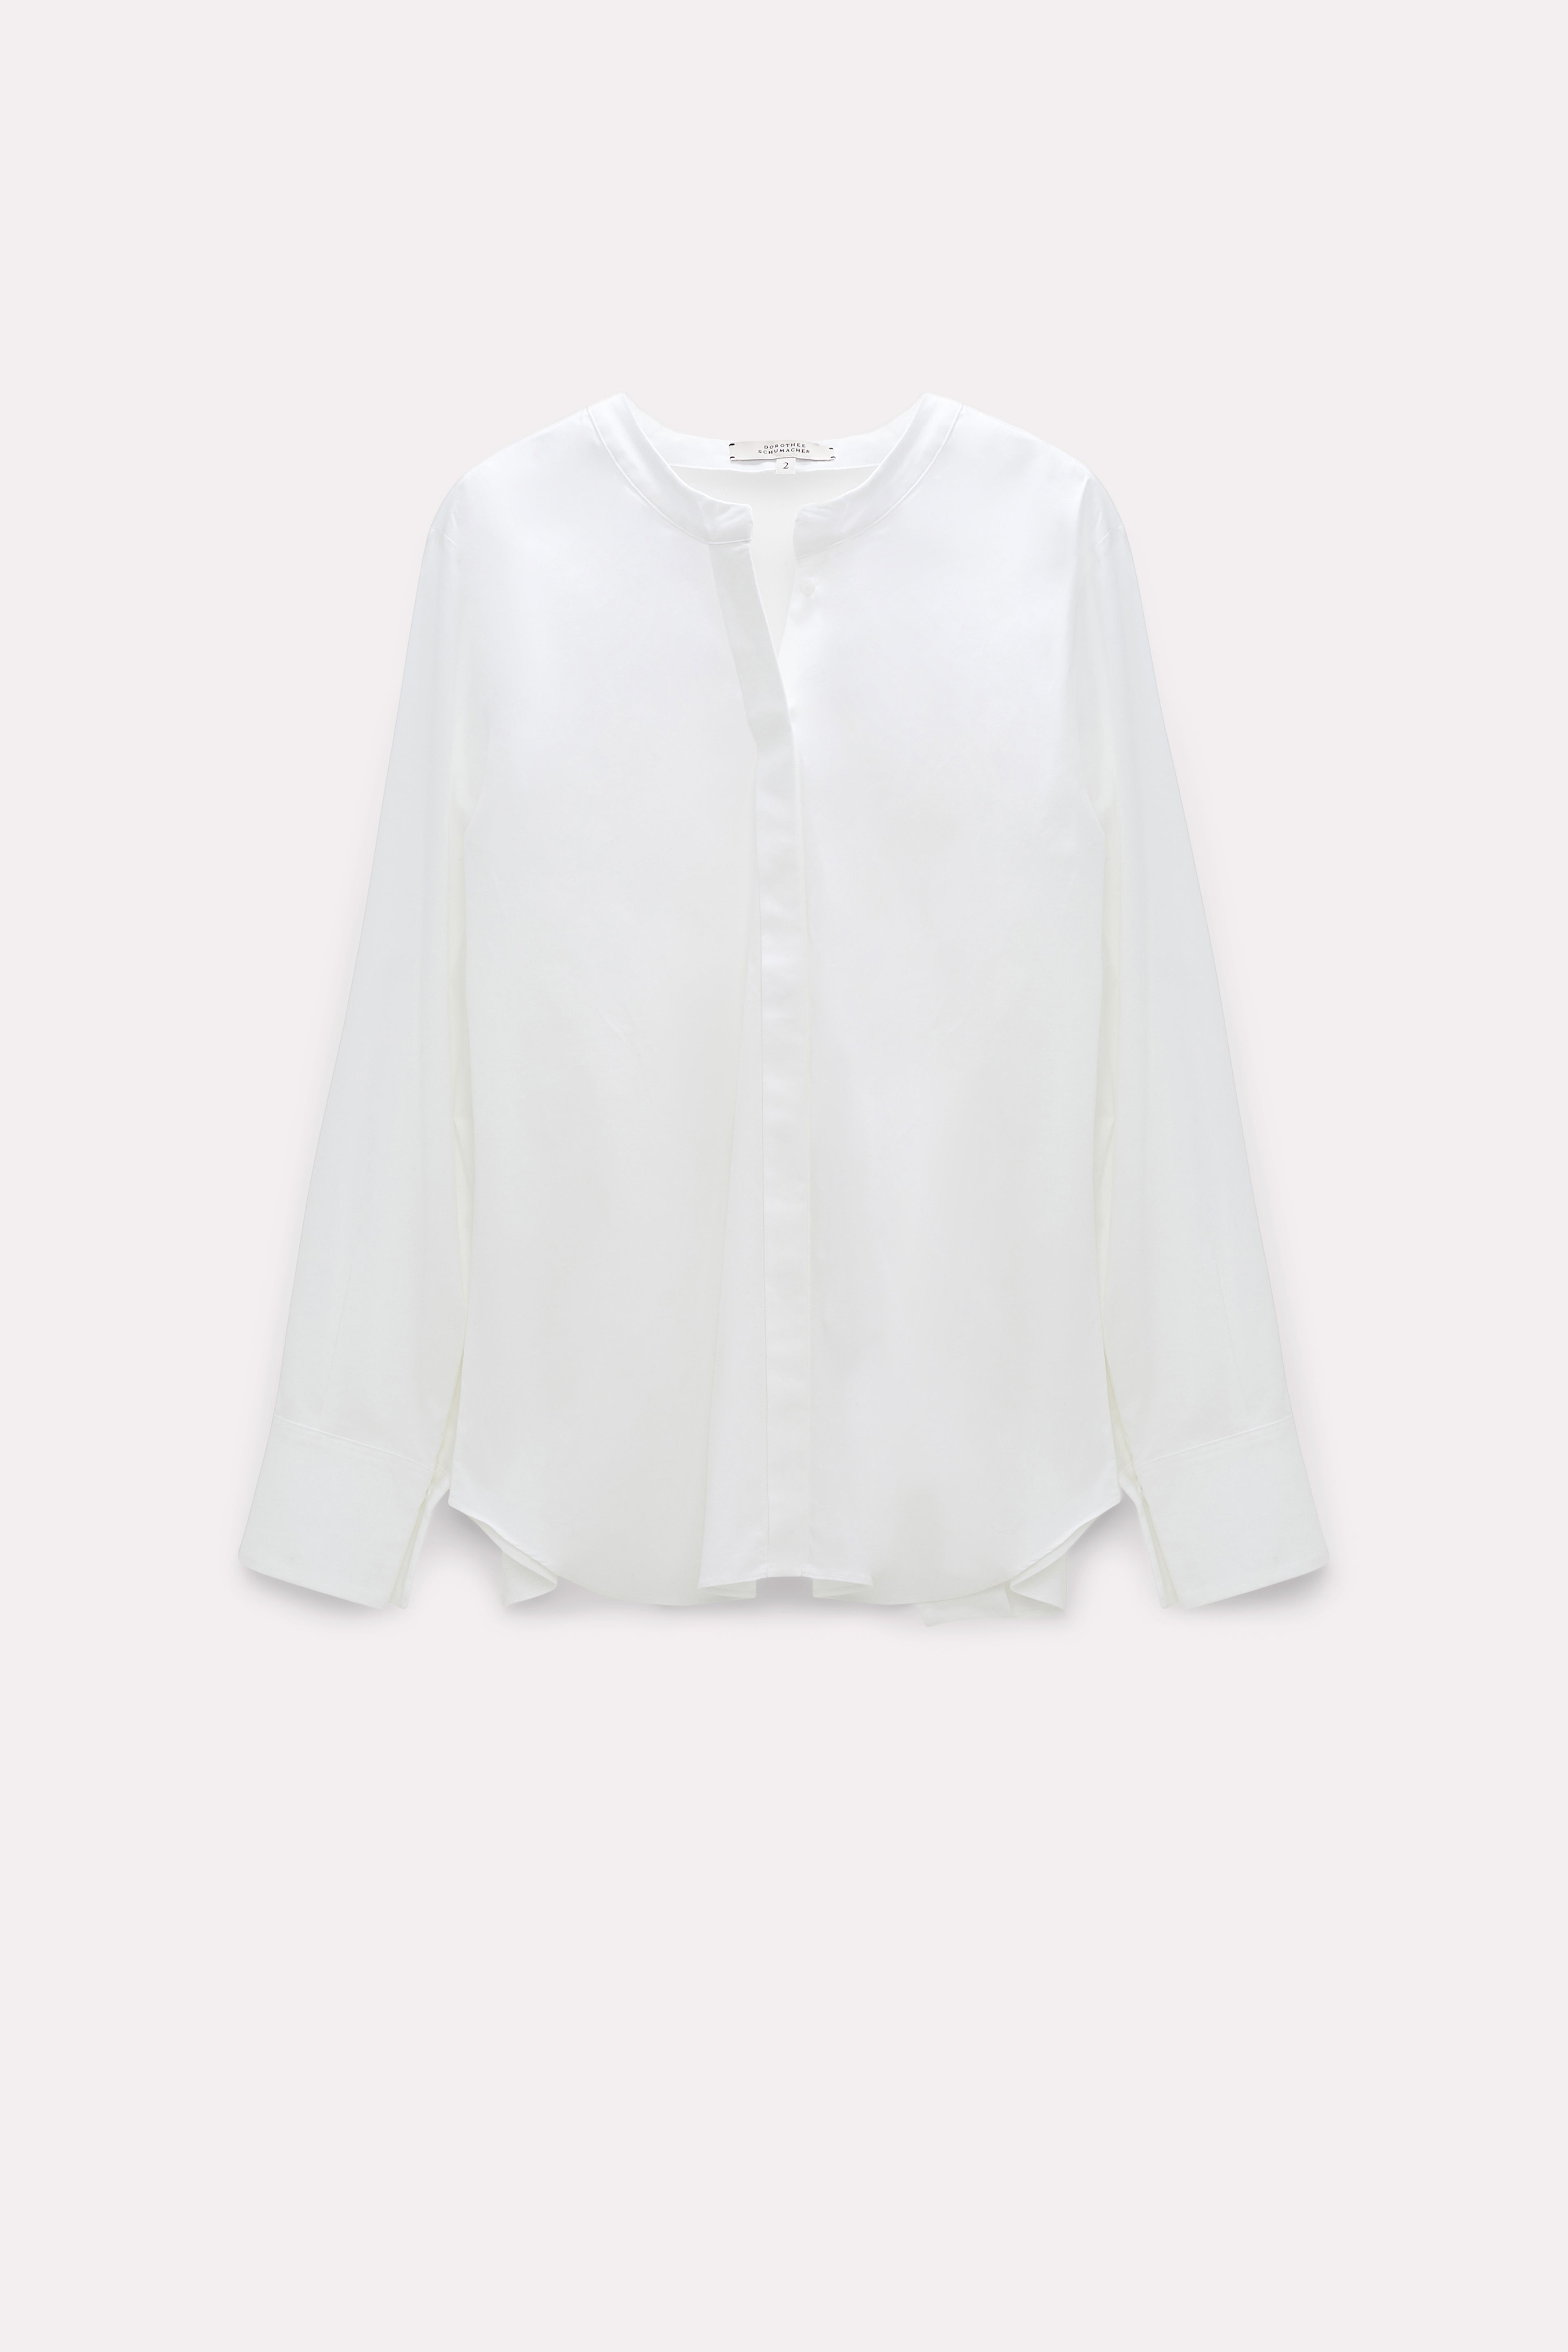 Dorothee-Schumacher-OUTLET-SALE-POPLIN-POWER-blouse-Blusen-ARCHIVE-COLLECTION_6379ca86-24ae-444f-9730-02f99b589a62.jpg